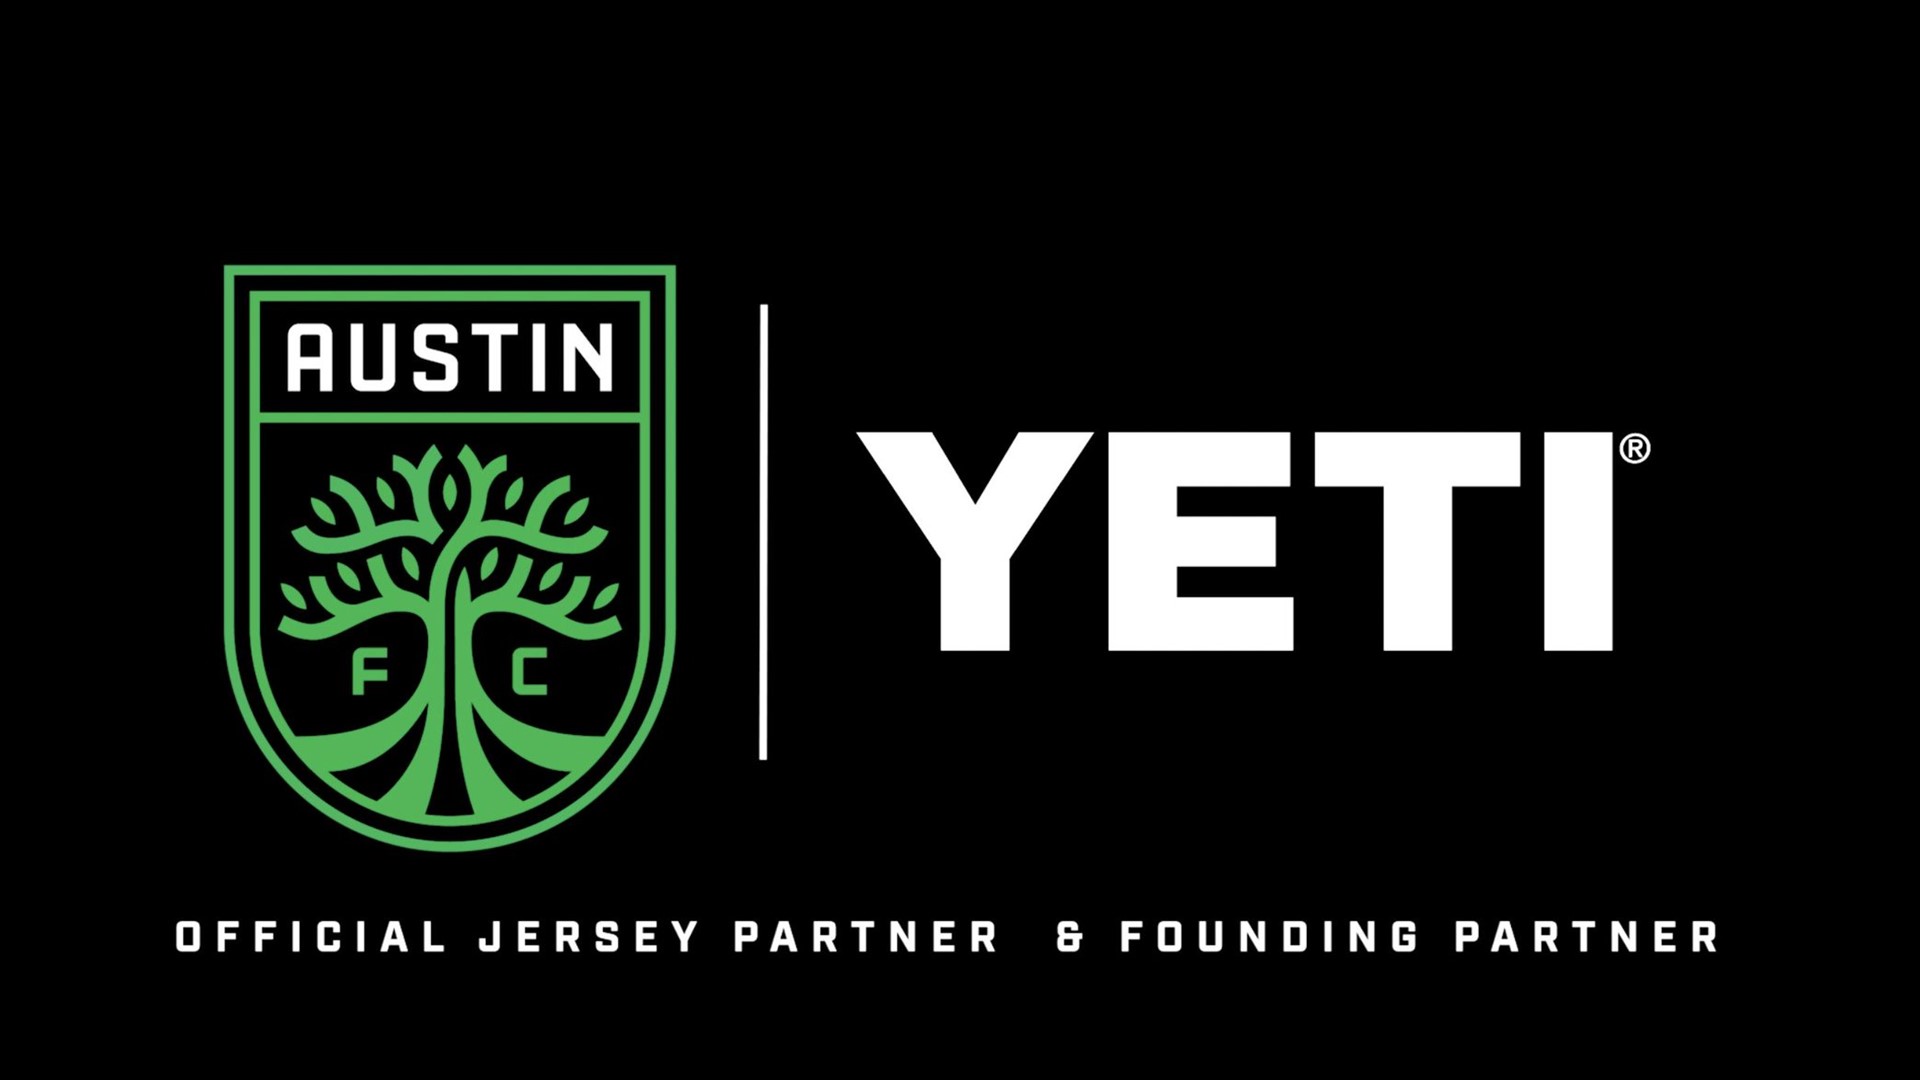 Austin FC said it will release two jerseys with YETI integration ahead of the club’s inaugural 2021 season.